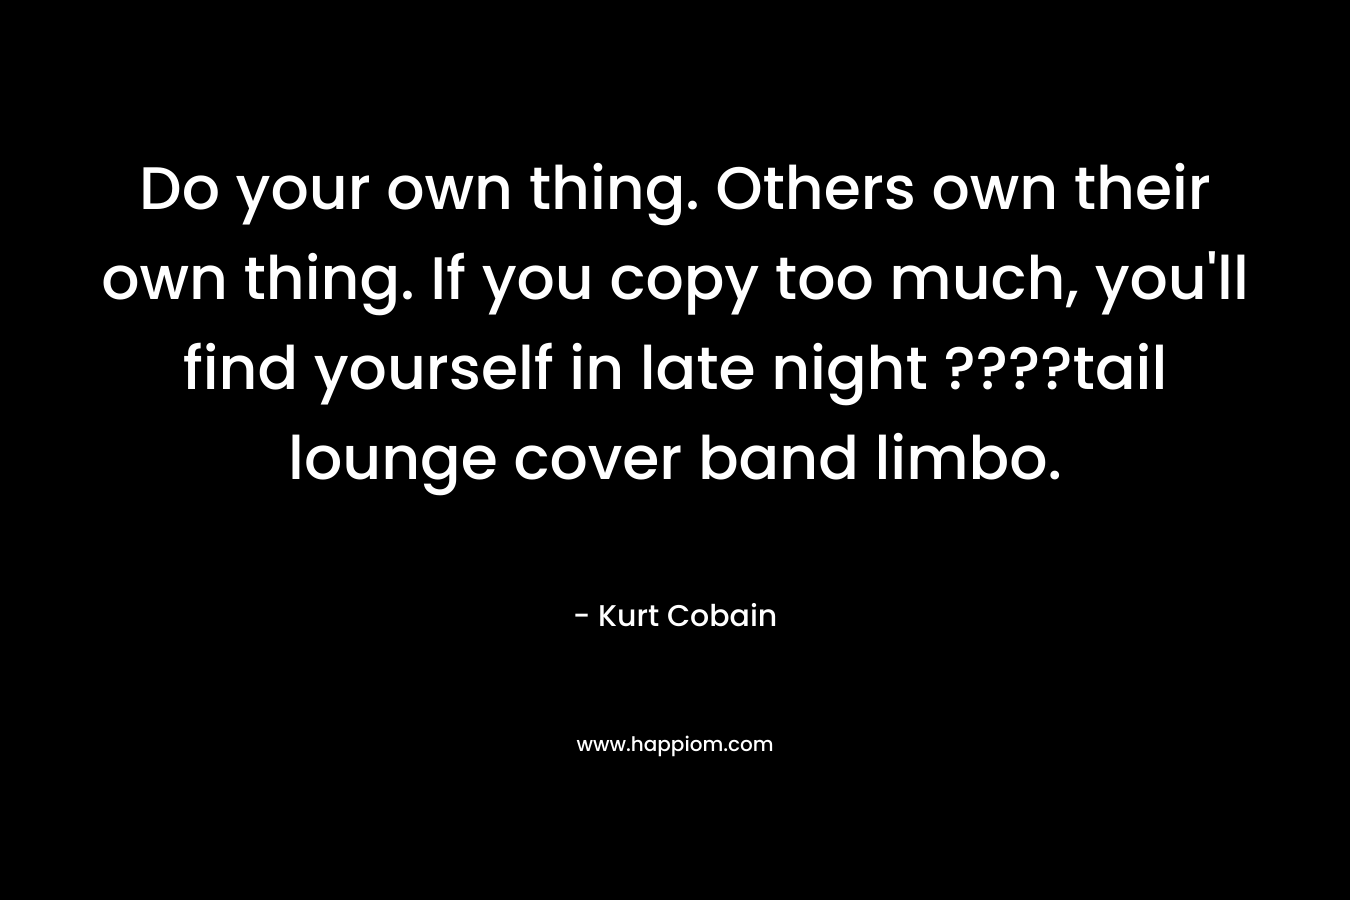 Do your own thing. Others own their own thing. If you copy too much, you’ll find yourself in late night ????tail lounge cover band limbo. – Kurt Cobain